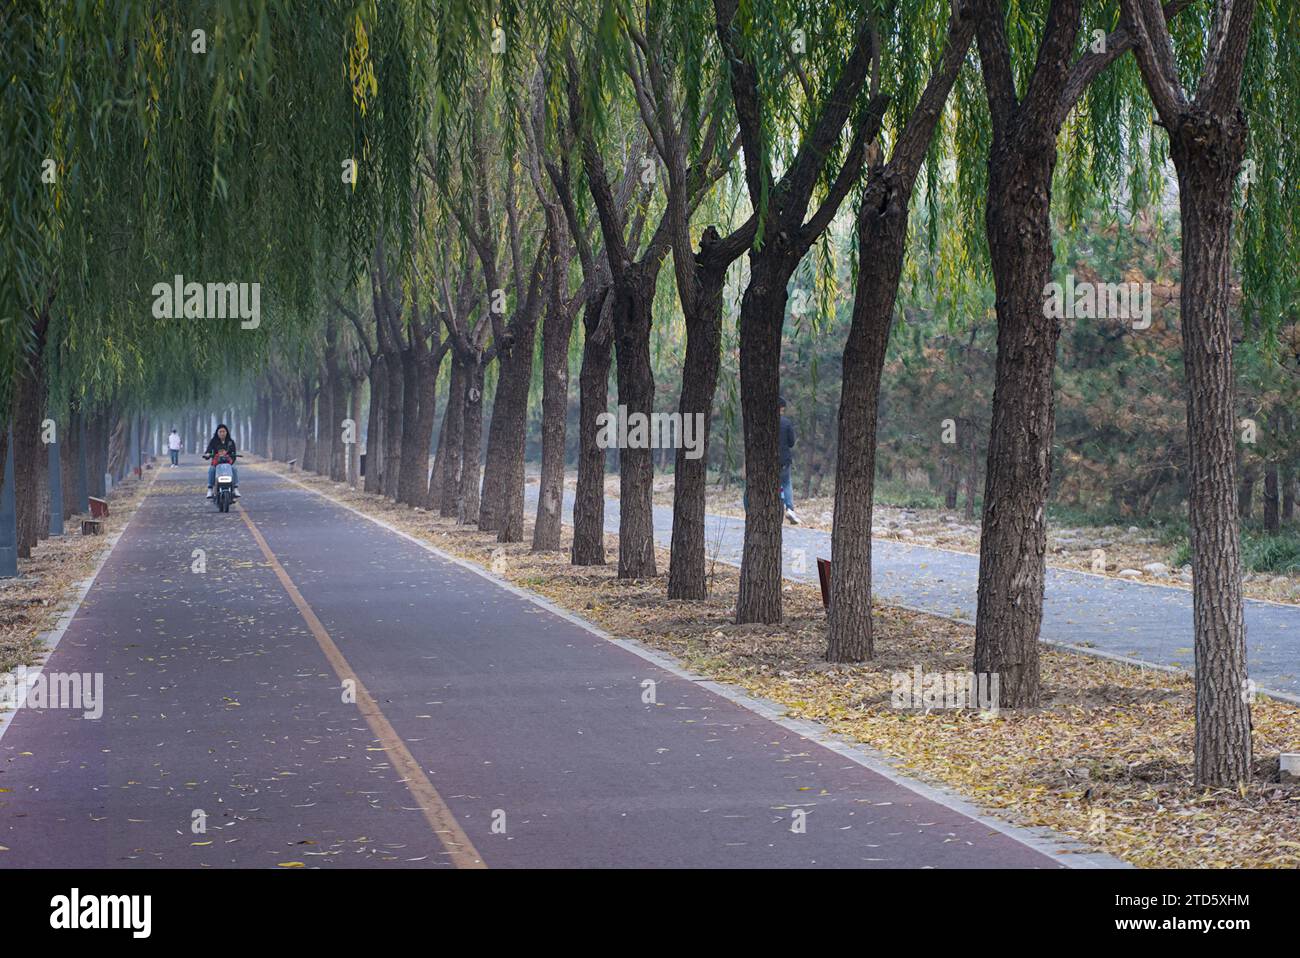 Paved road with two rows of willow trees on each side in Beijing, China. Stock Photo